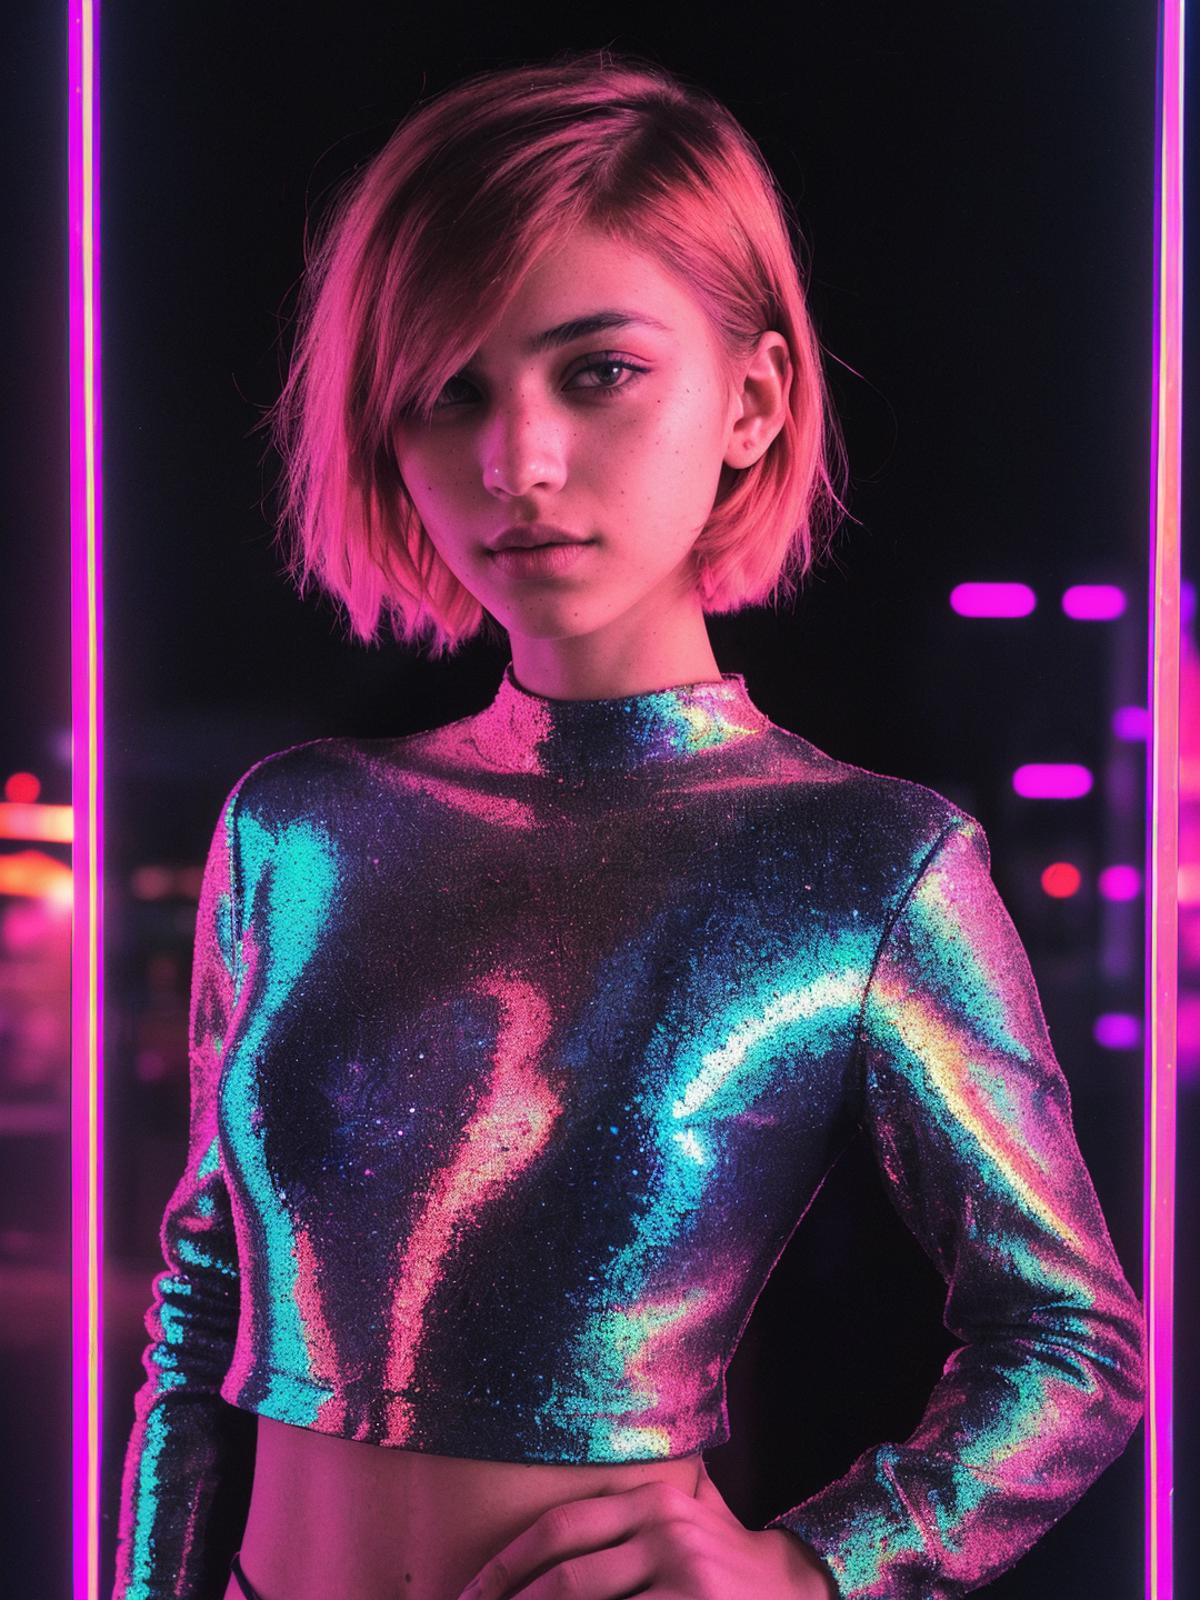 A woman wearing a shiny, metallic dress stands in front of a neon background.